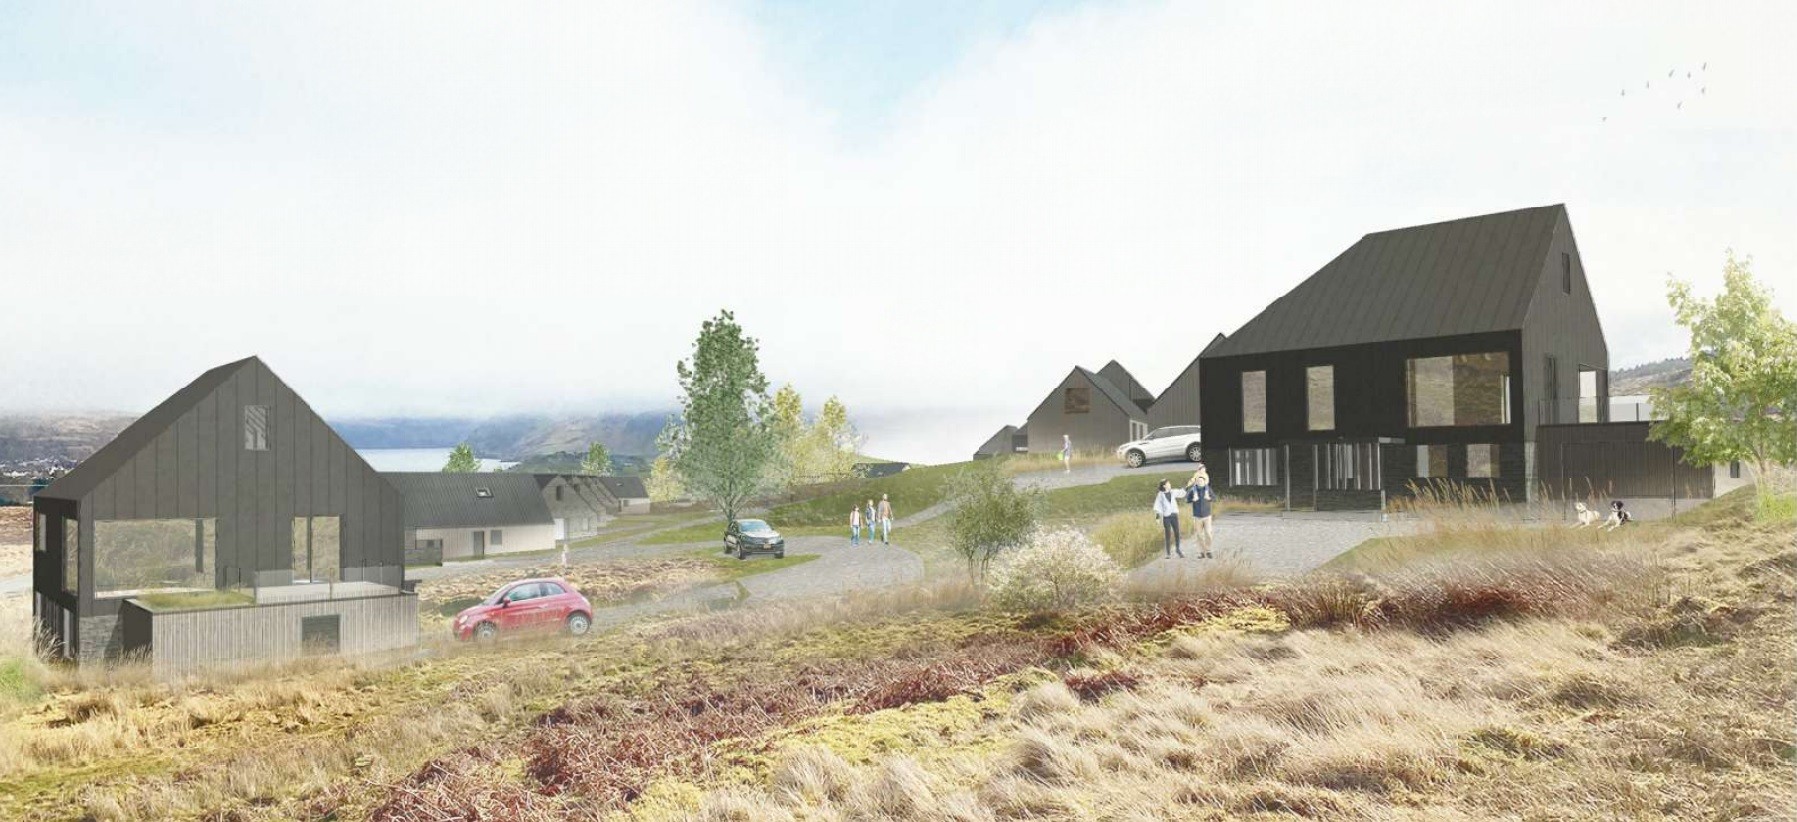 Plans submitted for 16 new homes on Skye